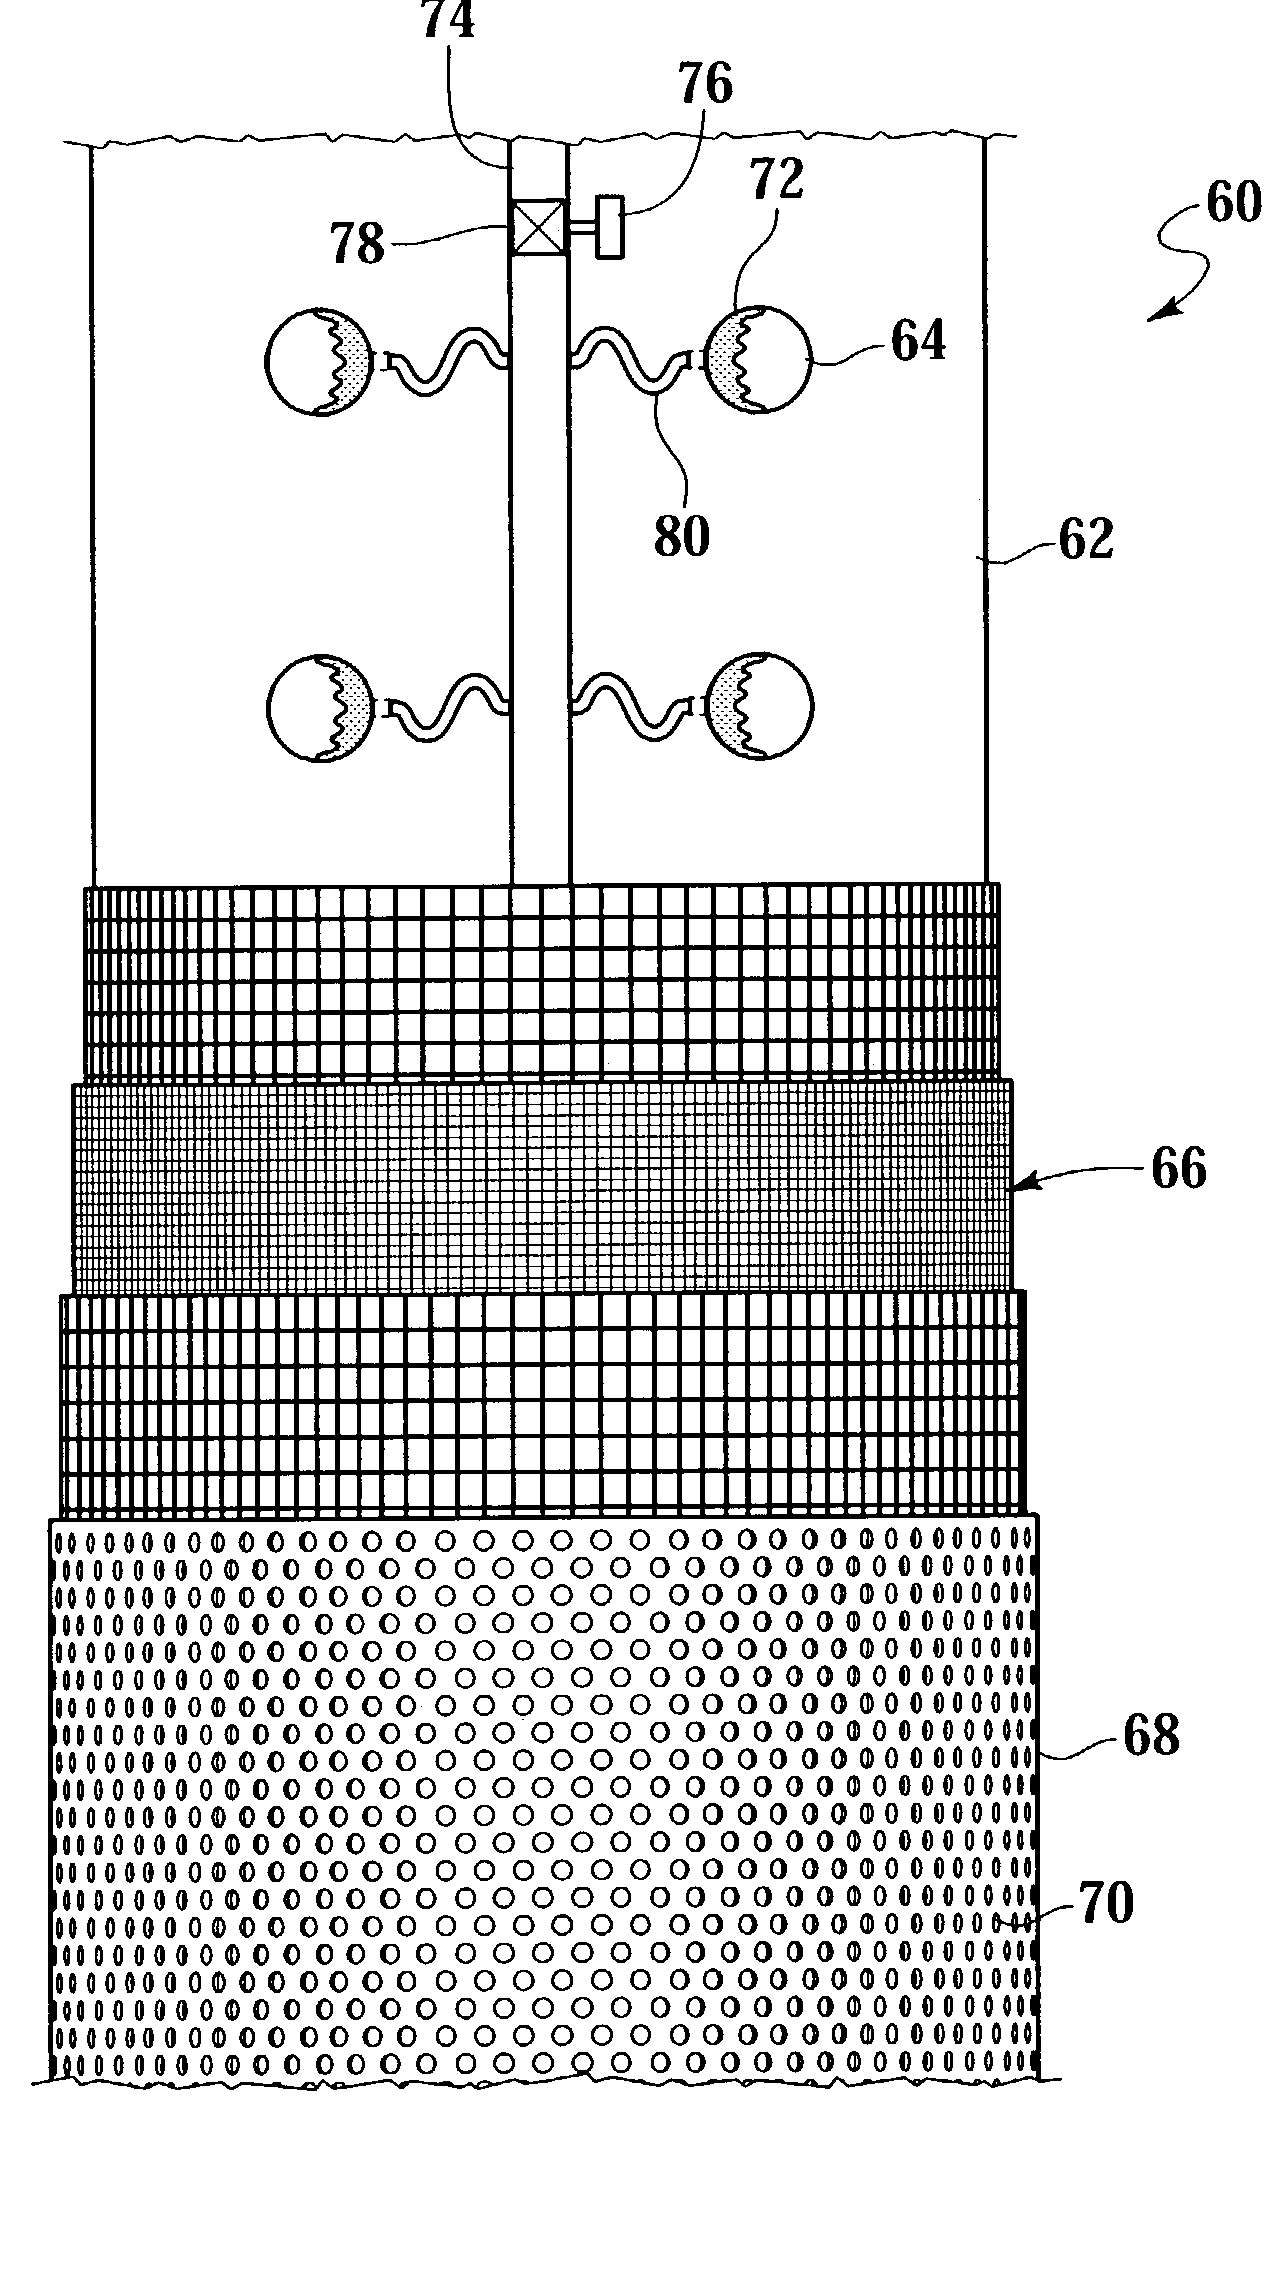 Expandable sand control screen assembly having fluid flow control capabilities and method for use of same